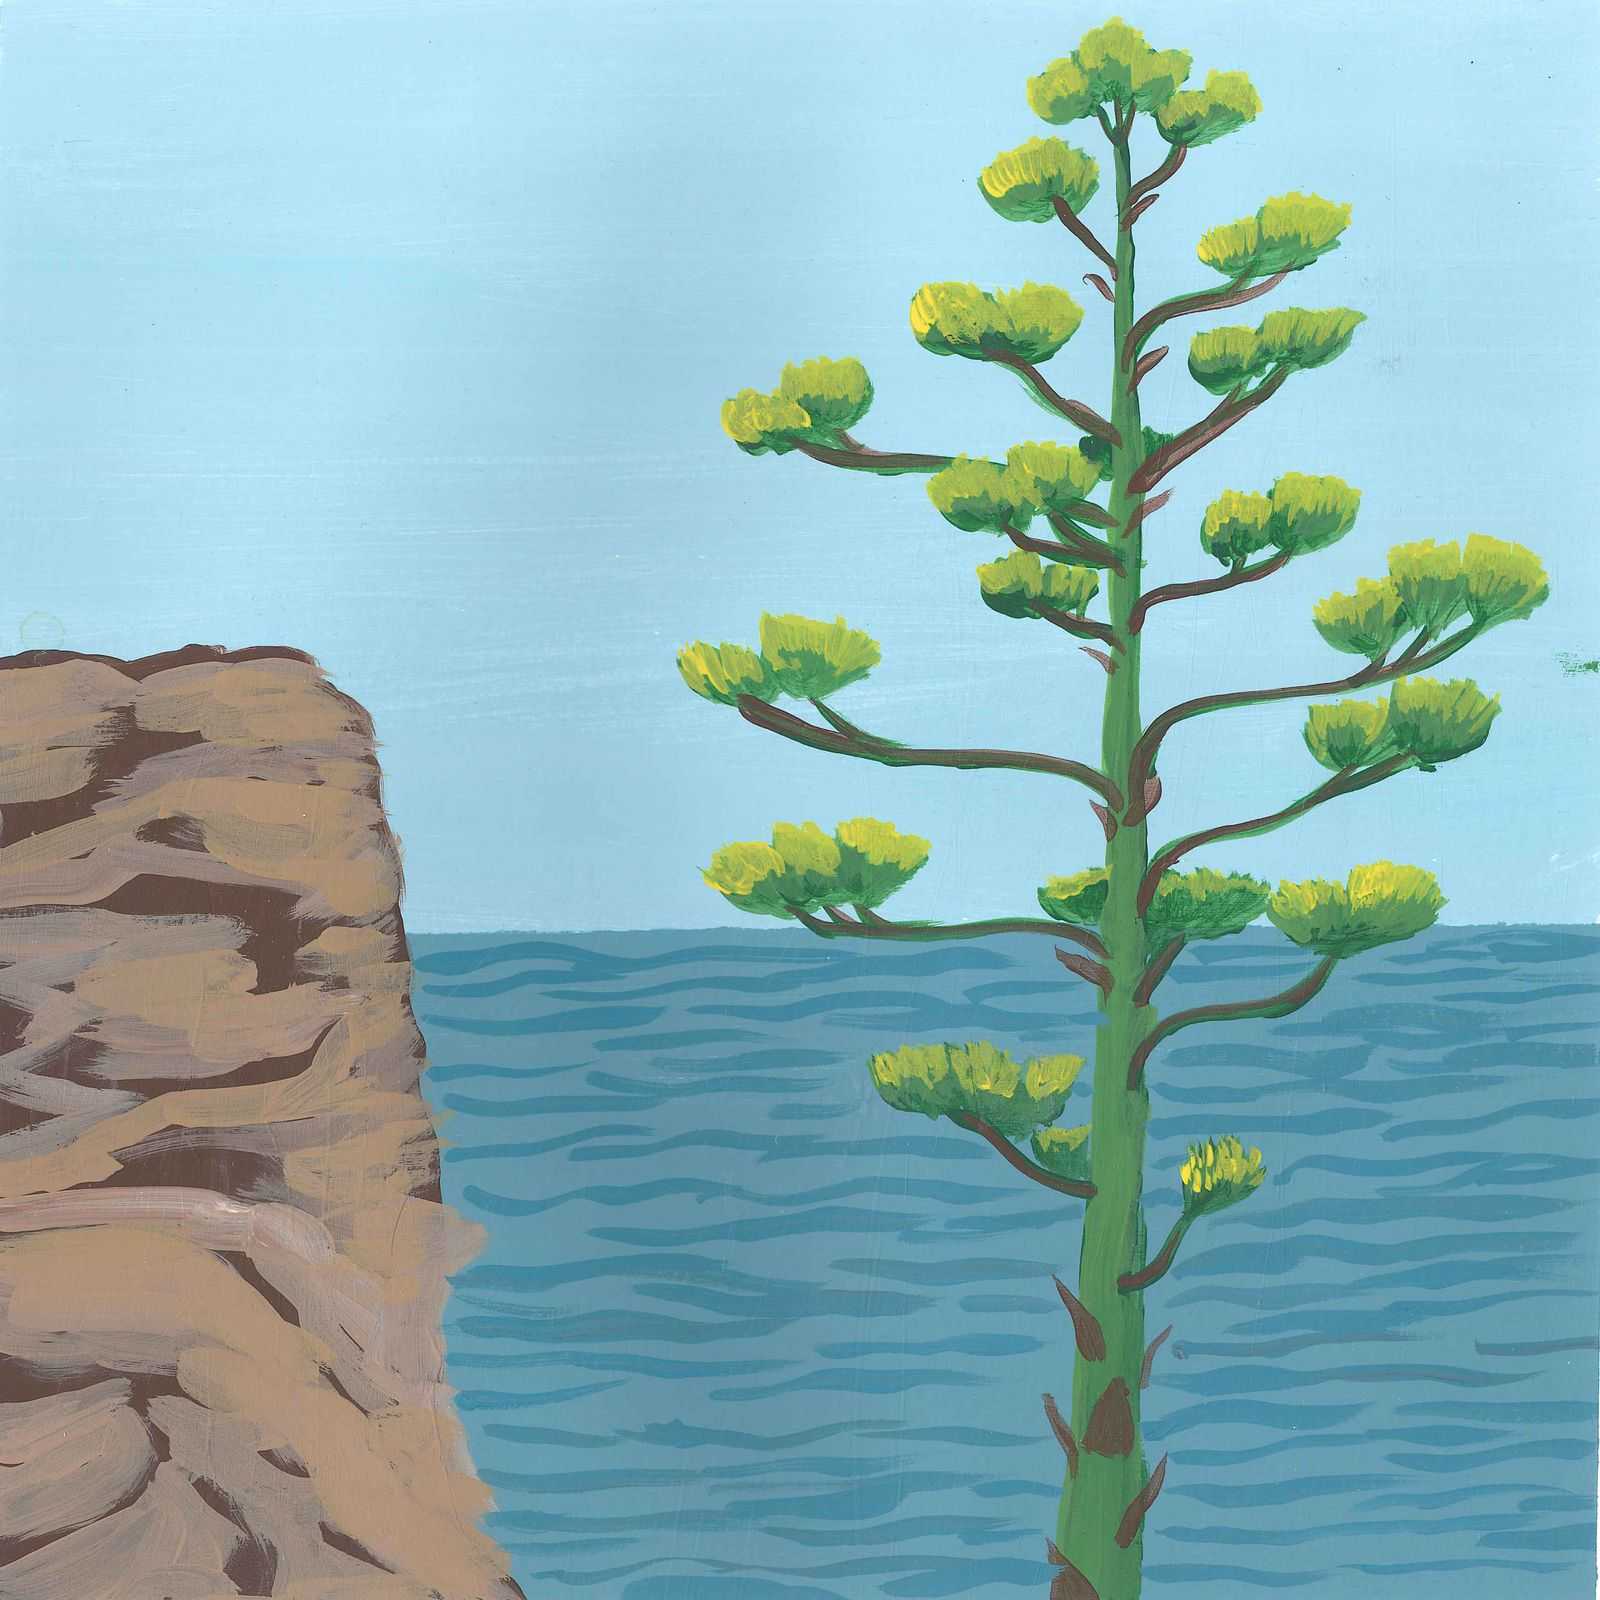 Kalaone Reef - nature landscape painting - earth.fm